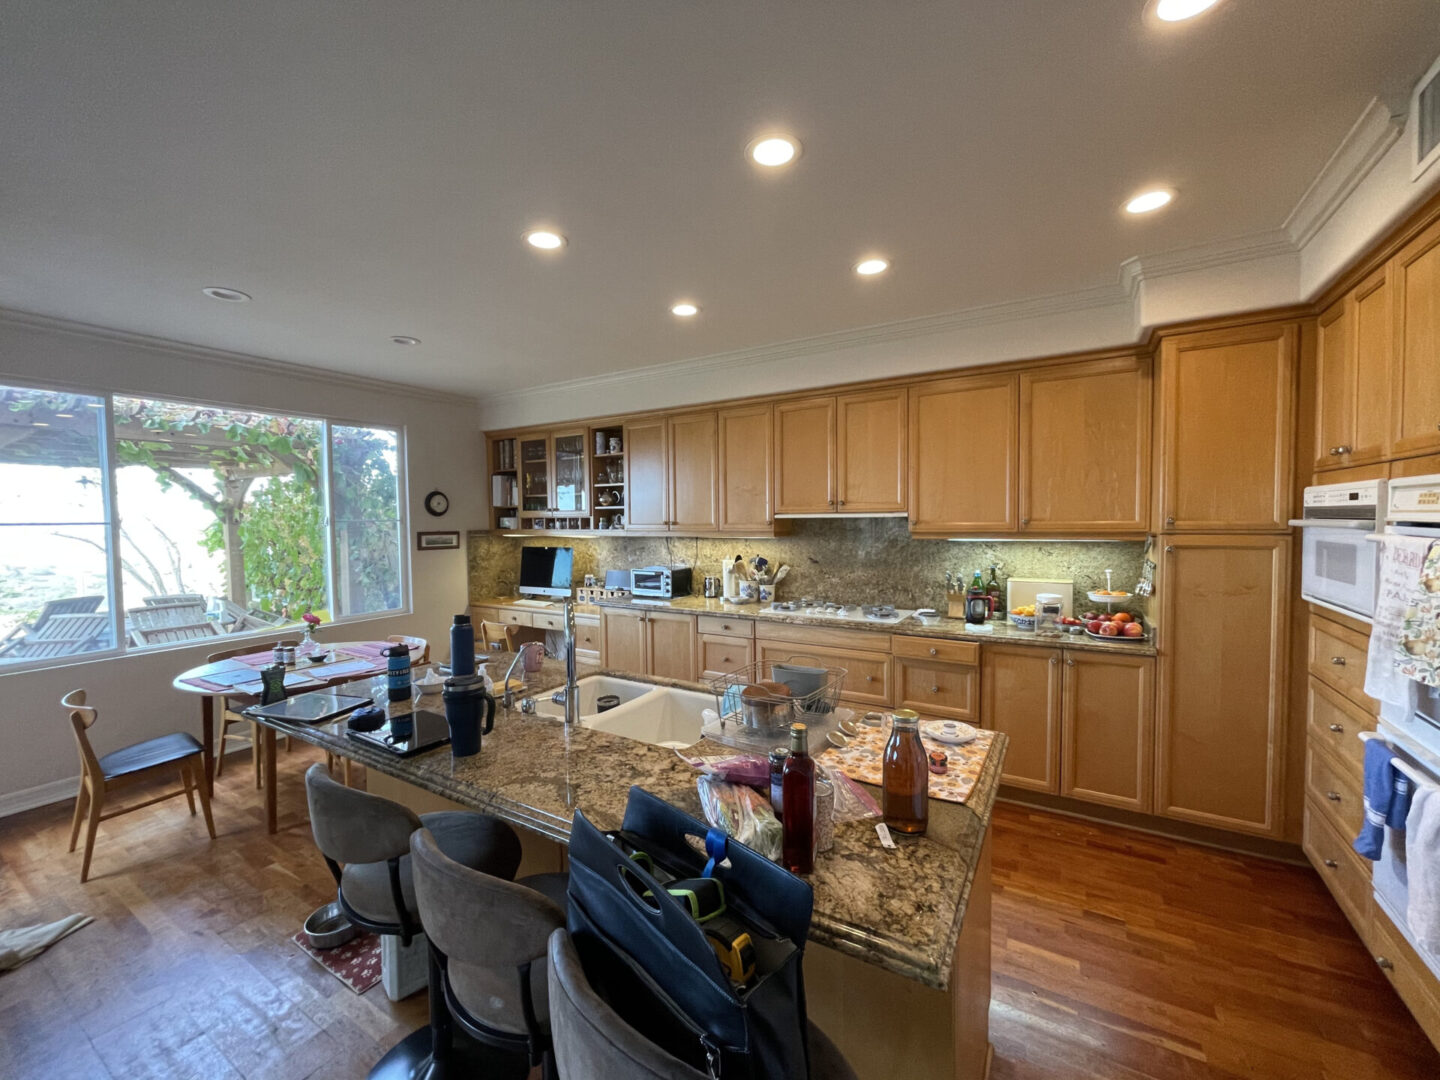 A beautiful kitchen area with so many chairs and table